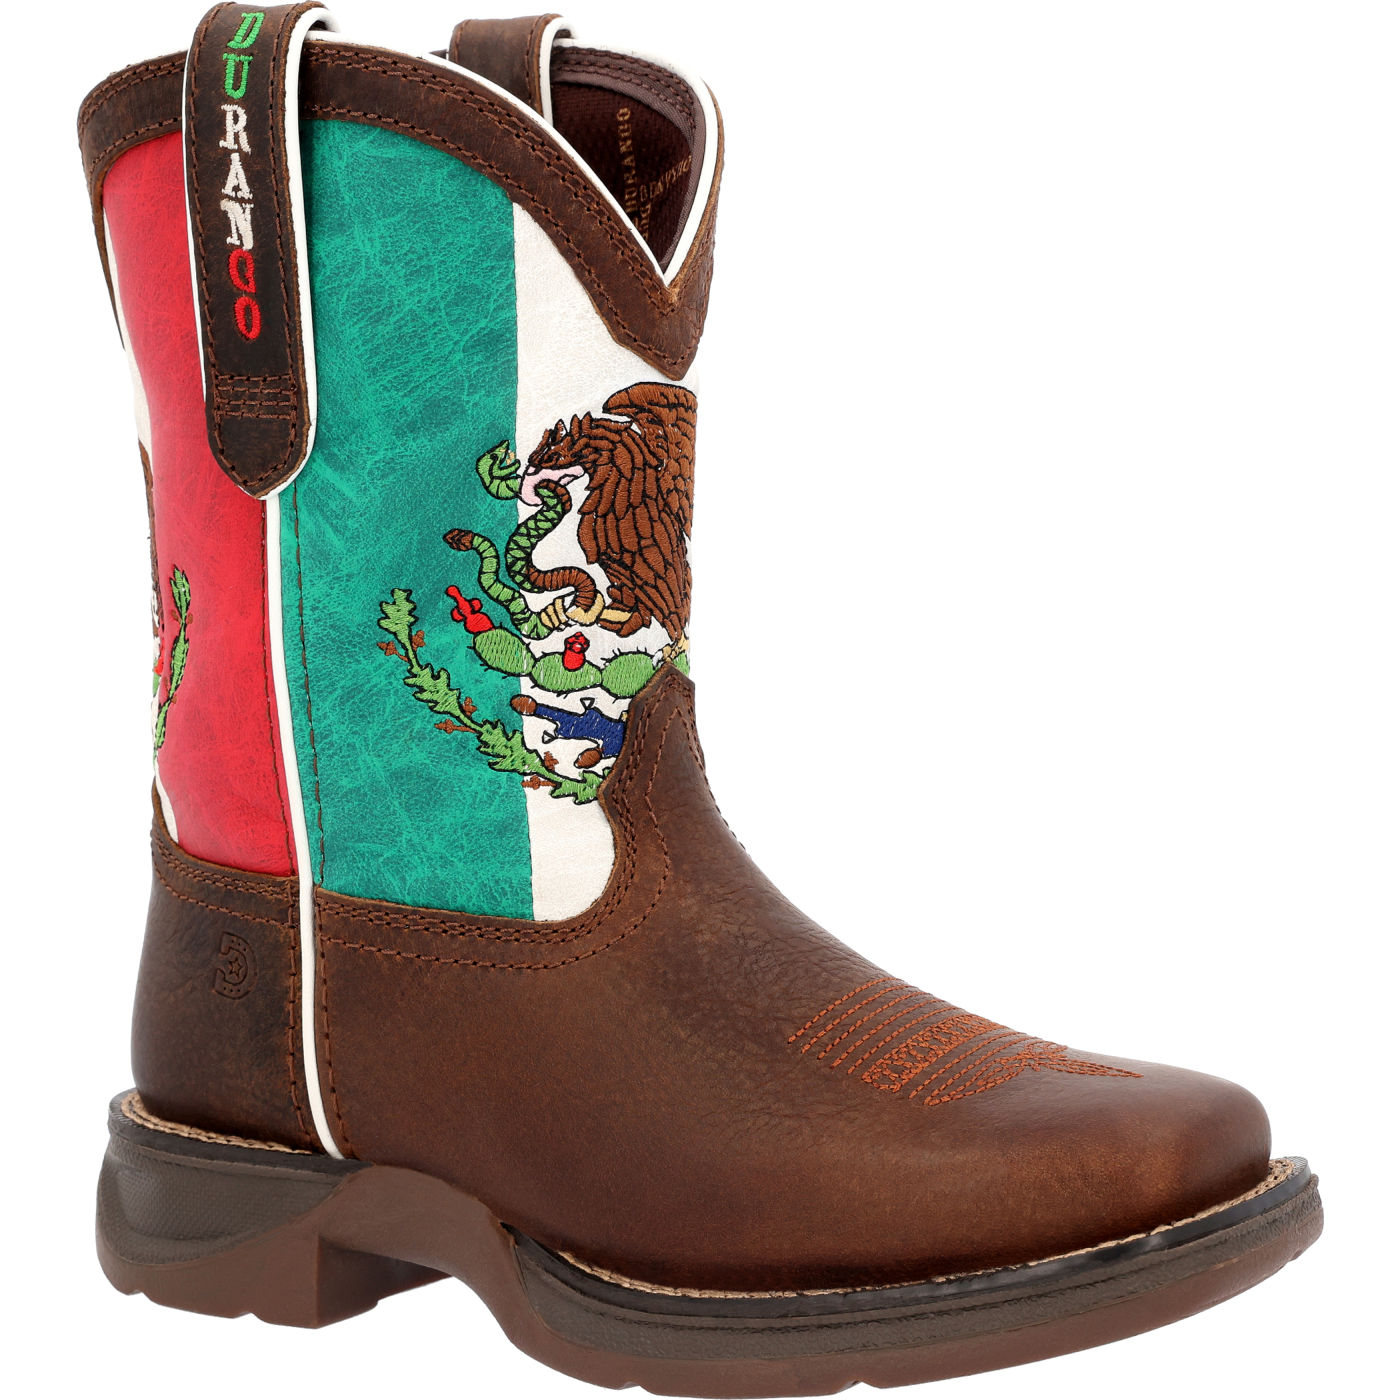 Kid's Orgullo Mexicano Mexico II Western Boots in Distressed Brown Leather,  Size: 9.5 K B / Medium by Ariat